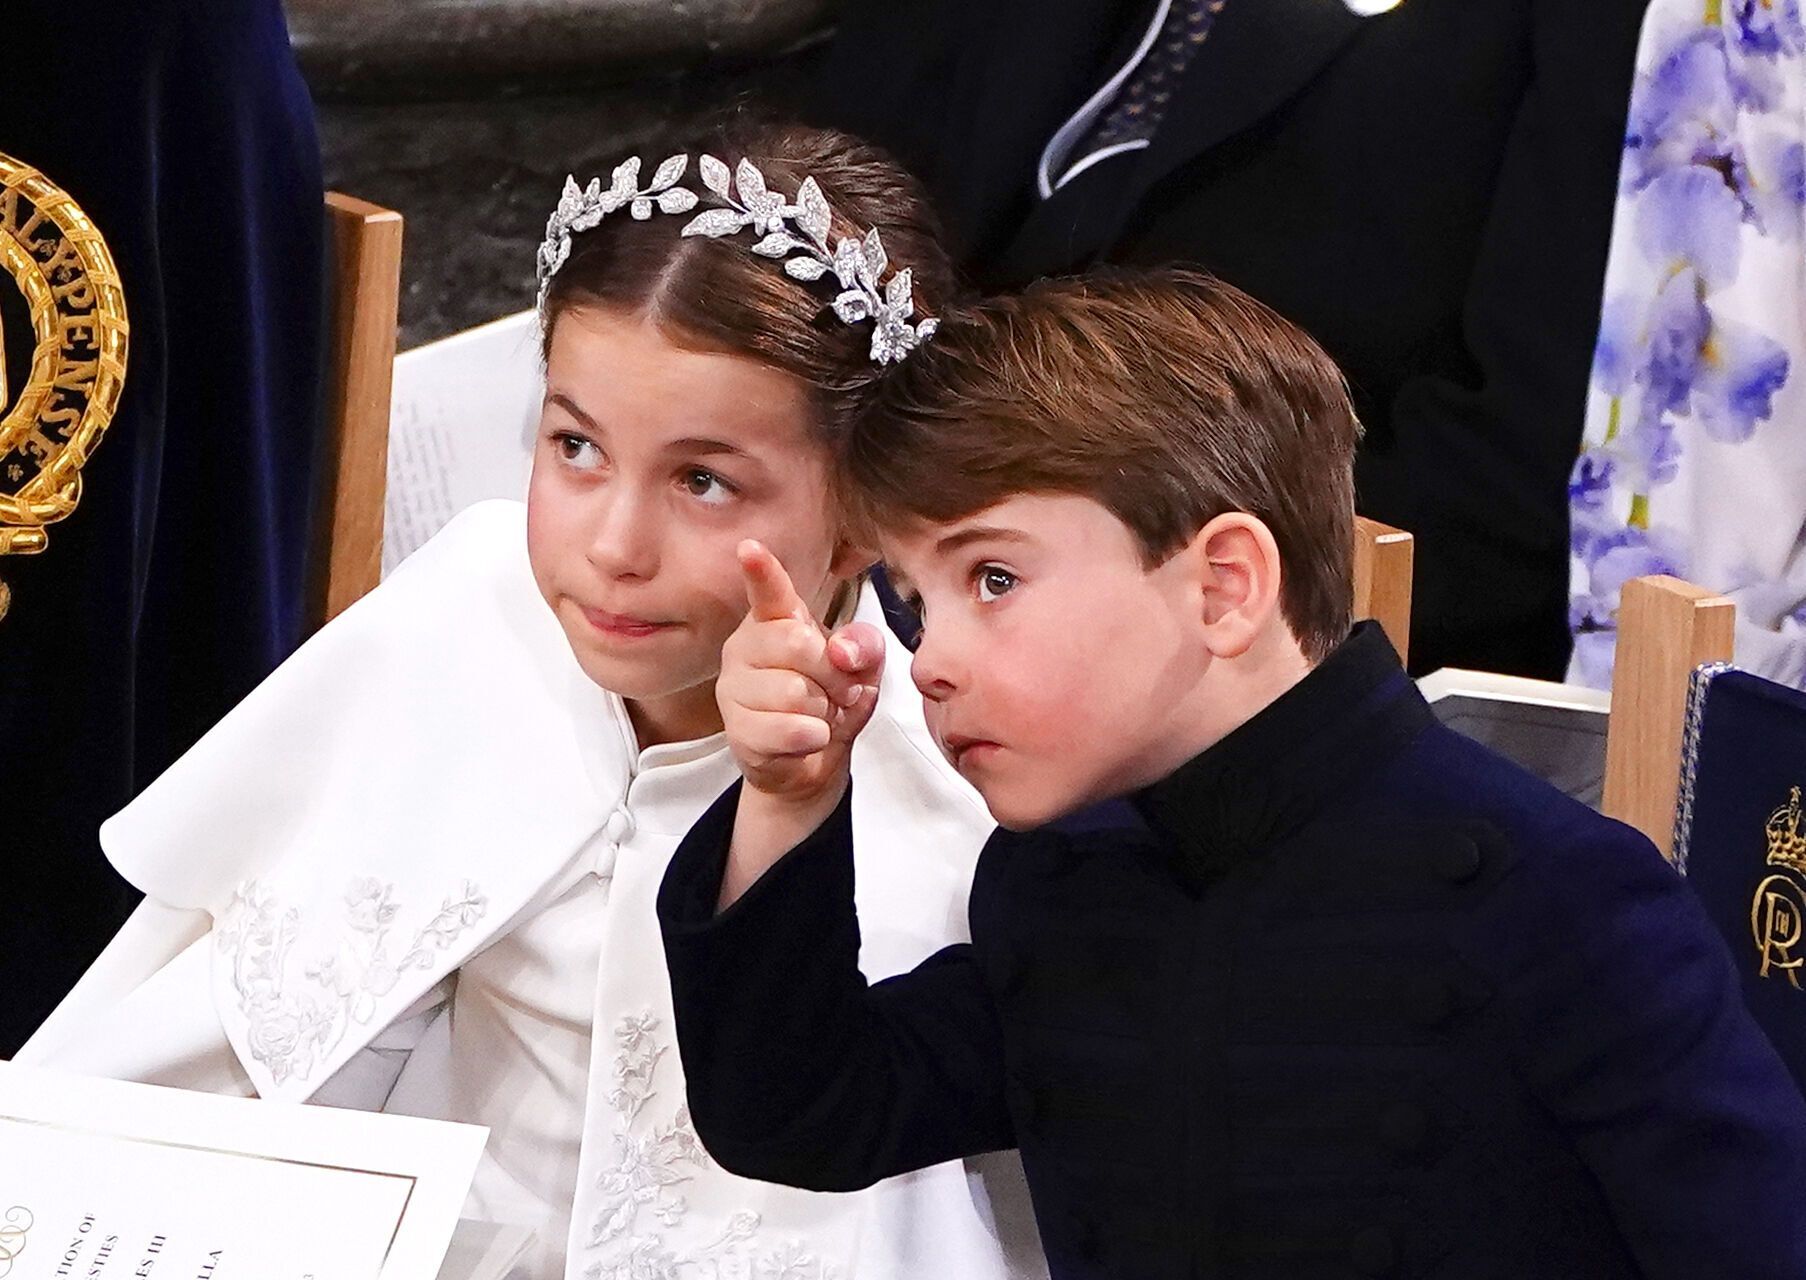 It became known why Prince Louis left the coronation of Charles III in May 2023: he was quietly taken out by a nanny